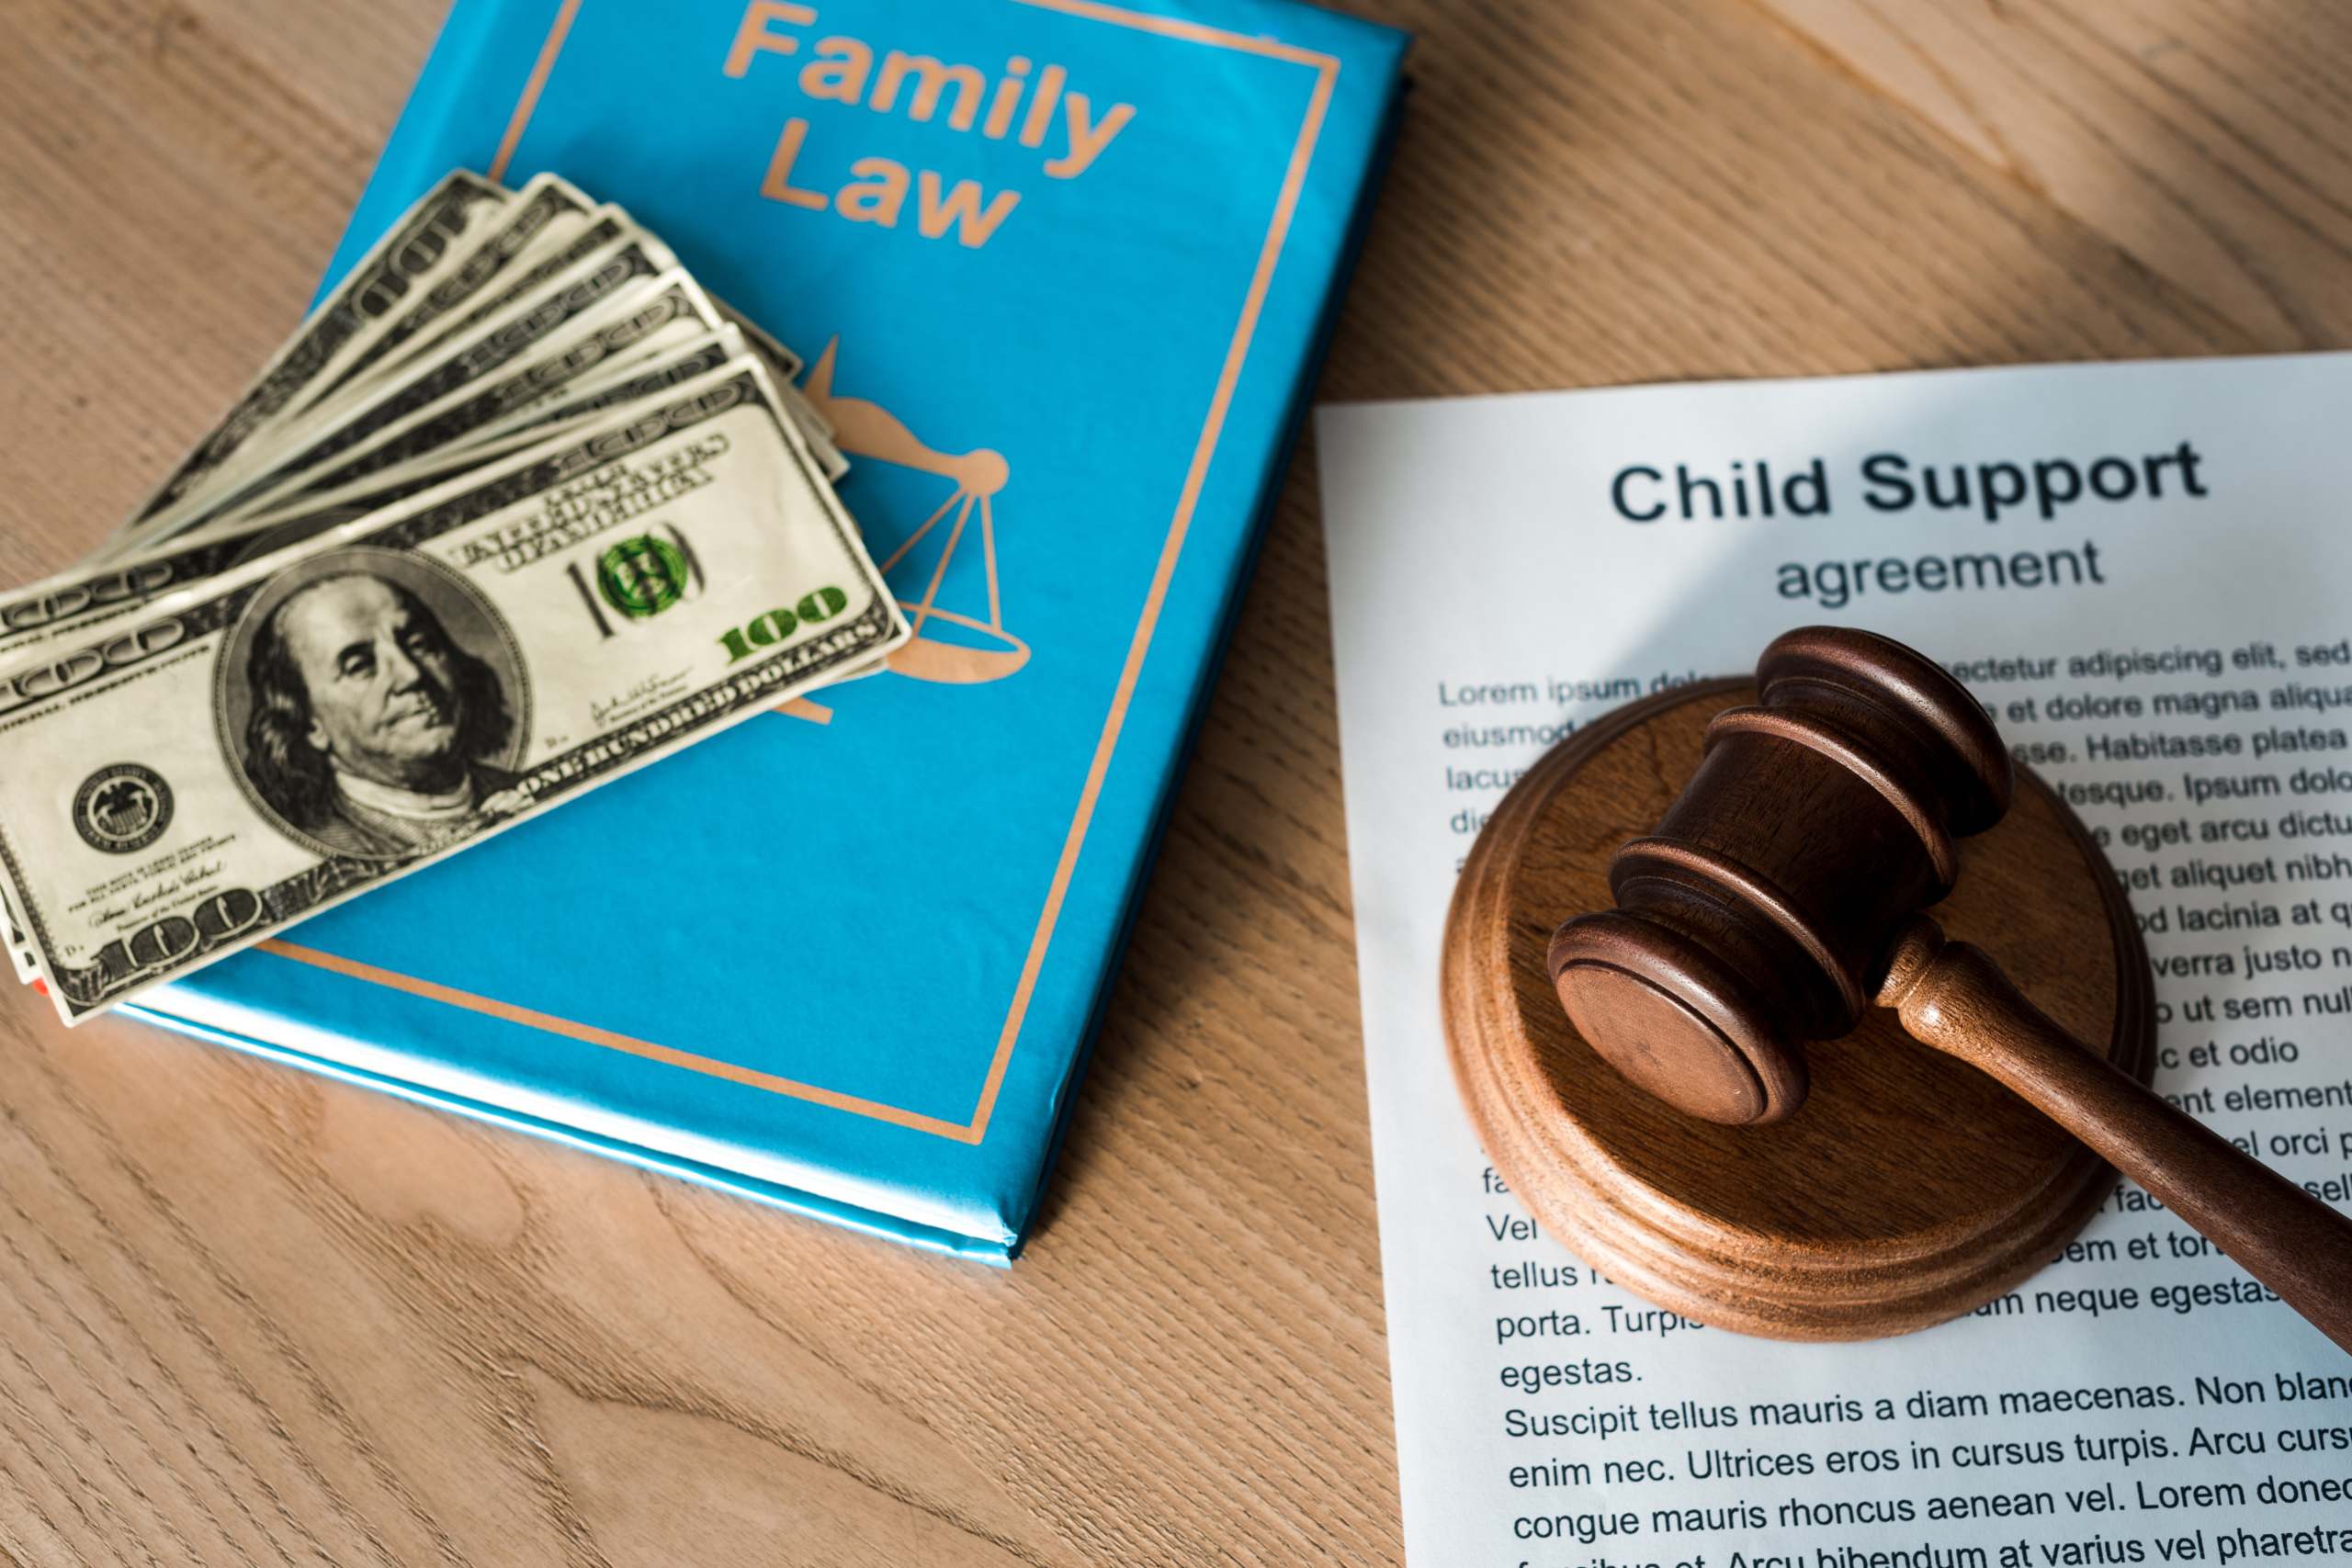 Many people may worry that their child support may be affected if their spouse is suffering from substance abuse